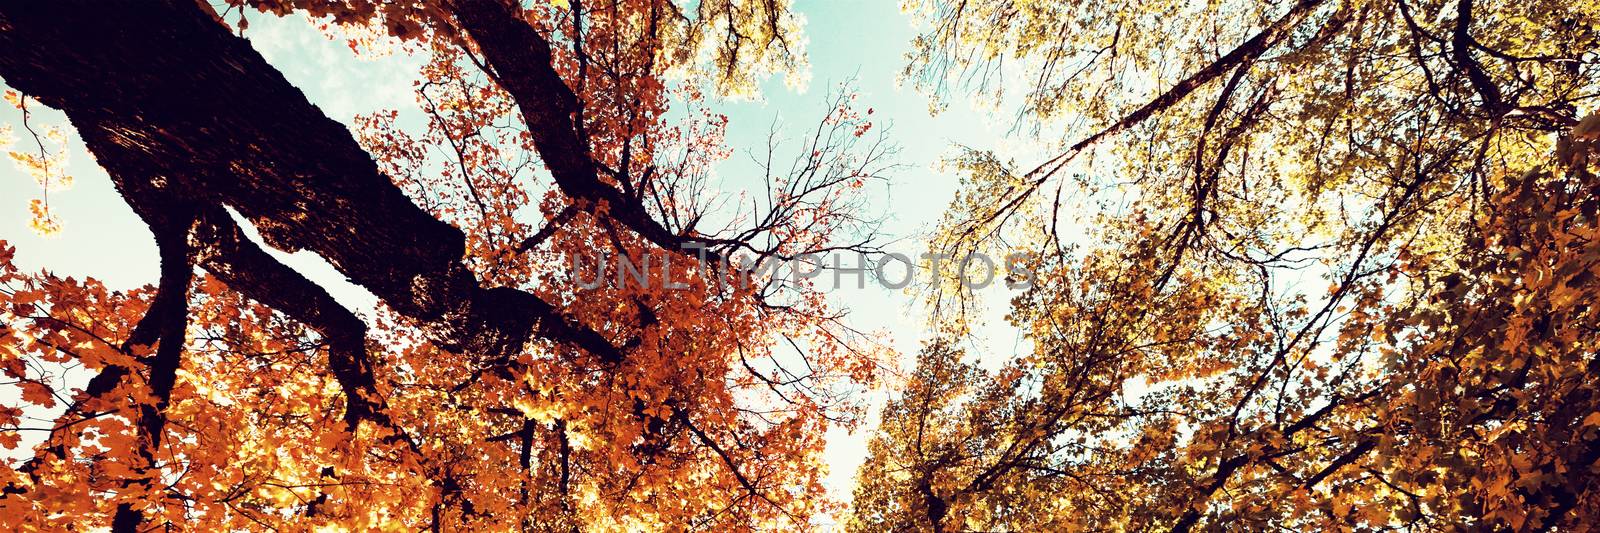 Autumnal nature scene with copy space